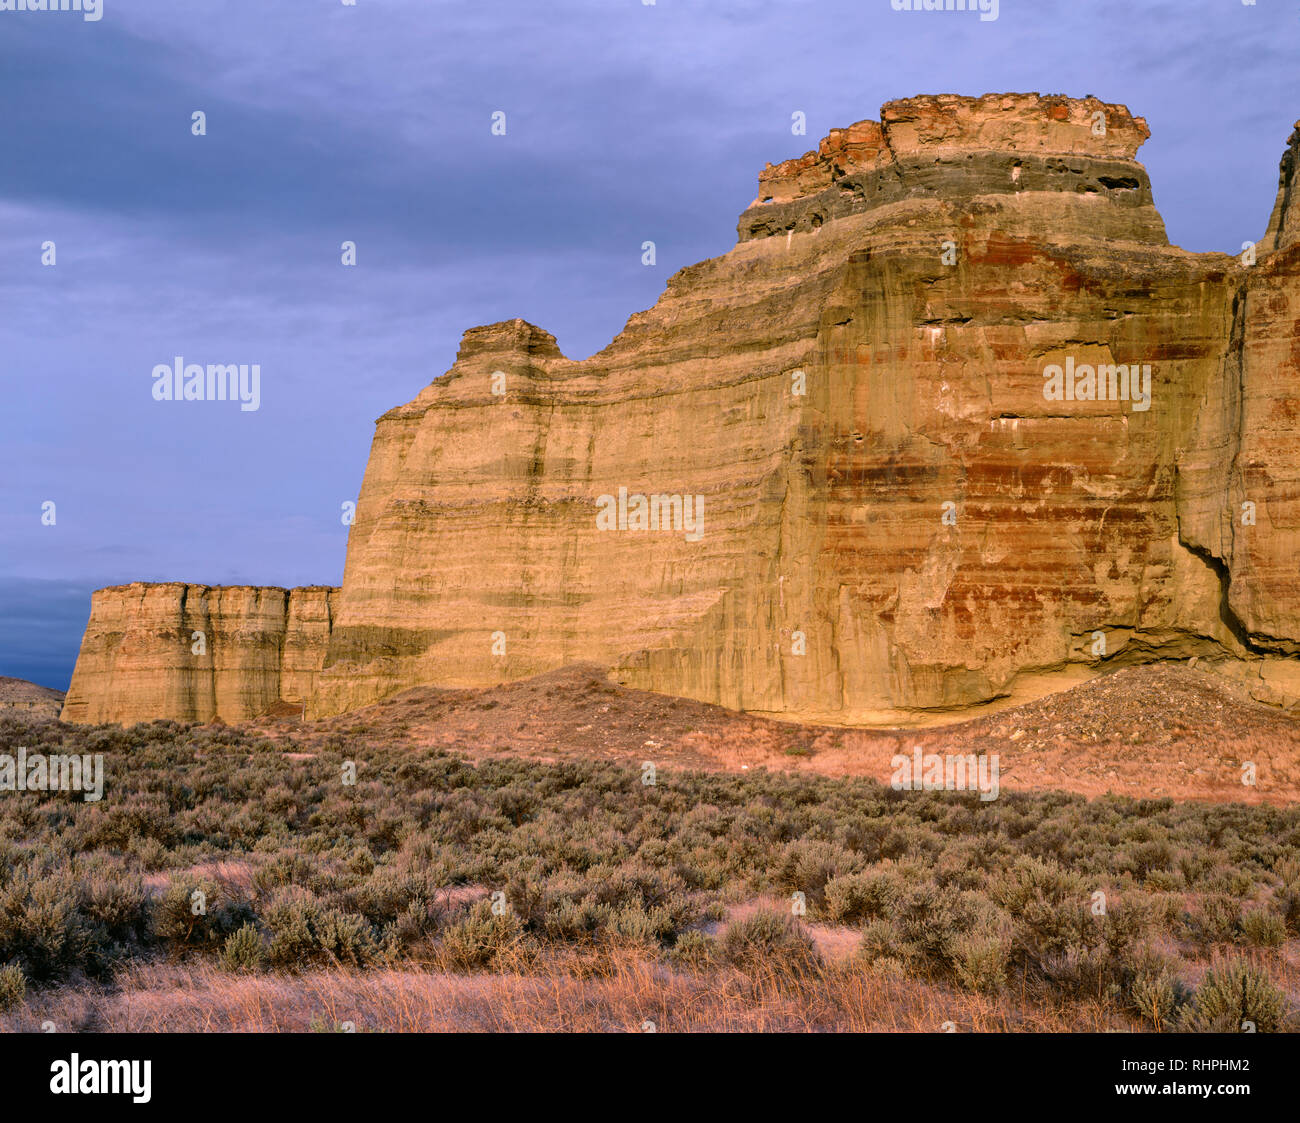 USA, Oregon, Malheur County, Clouds at sunrise over formation of fossil-bearing clay called the Pillars of Rome and surrounding sagebrush plain. Stock Photo